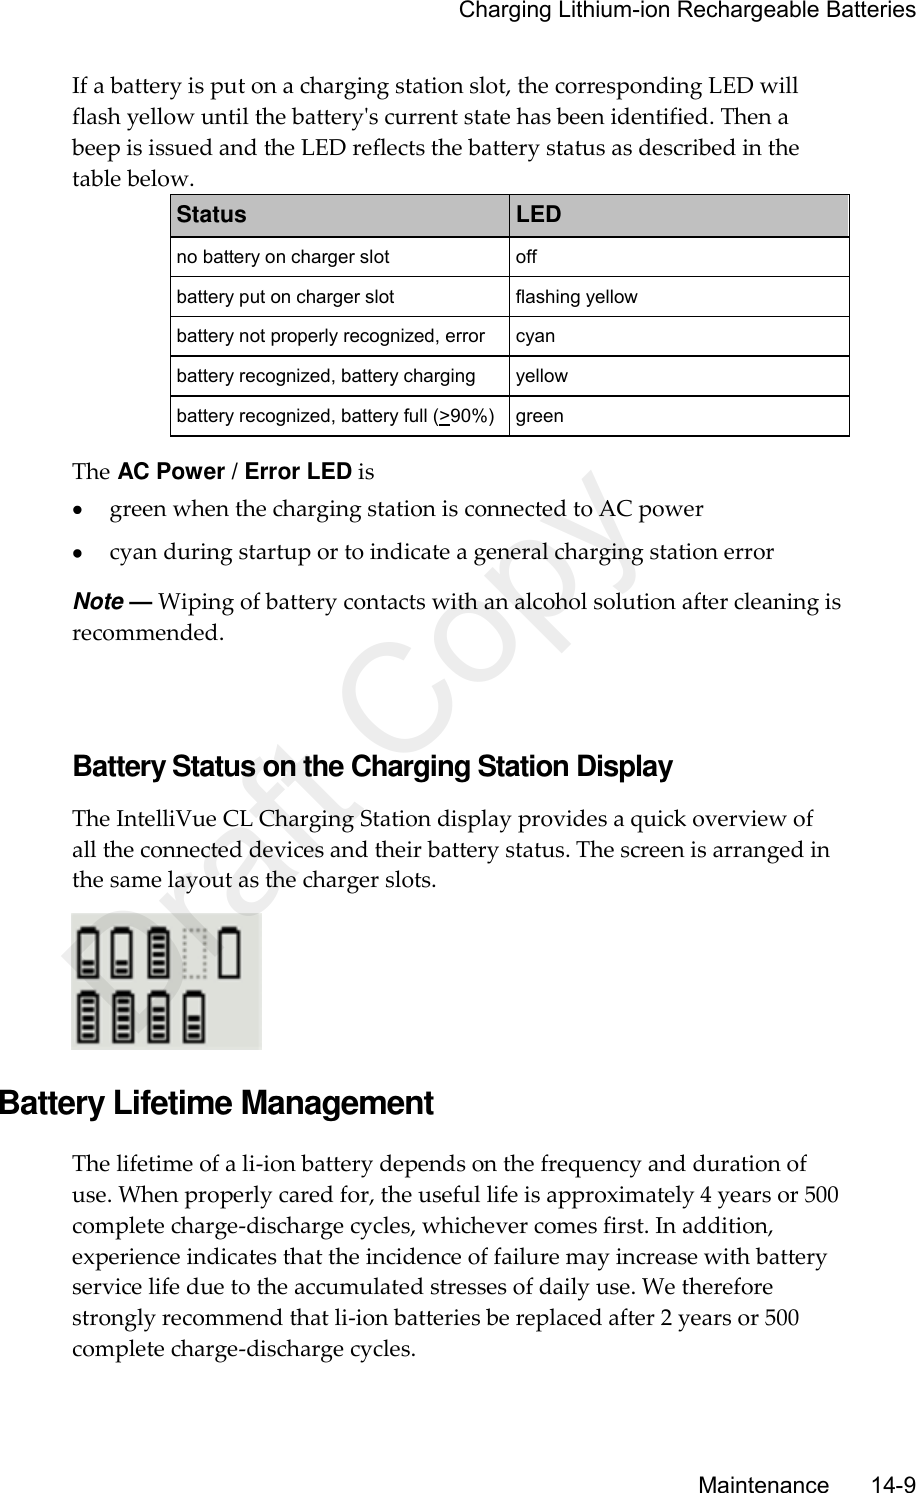     Charging Lithium-ion Rechargeable Batteries       Maintenance       14-9 If a battery is put on a charging station slot, the corresponding LED will flash yellow until the battery&apos;s current state has been identified. Then a beep is issued and the LED reflects the battery status as described in the table below. Status LED no battery on charger slot off battery put on charger slot flashing yellow battery not properly recognized, error cyan battery recognized, battery charging yellow battery recognized, battery full (&gt;90%) green The AC Power / Error LED is  green when the charging station is connected to AC power  cyan during startup or to indicate a general charging station error Note — Wiping of battery contacts with an alcohol solution after cleaning is recommended.   Battery Status on the Charging Station Display The IntelliVue CL Charging Station display provides a quick overview of all the connected devices and their battery status. The screen is arranged in the same layout as the charger slots.   Battery Lifetime Management The lifetime of a li-ion battery depends on the frequency and duration of use. When properly cared for, the useful life is approximately 4 years or 500 complete charge-discharge cycles, whichever comes first. In addition, experience indicates that the incidence of failure may increase with battery service life due to the accumulated stresses of daily use. We therefore strongly recommend that li-ion batteries be replaced after 2 years or 500 complete charge-discharge cycles. Draft Copy